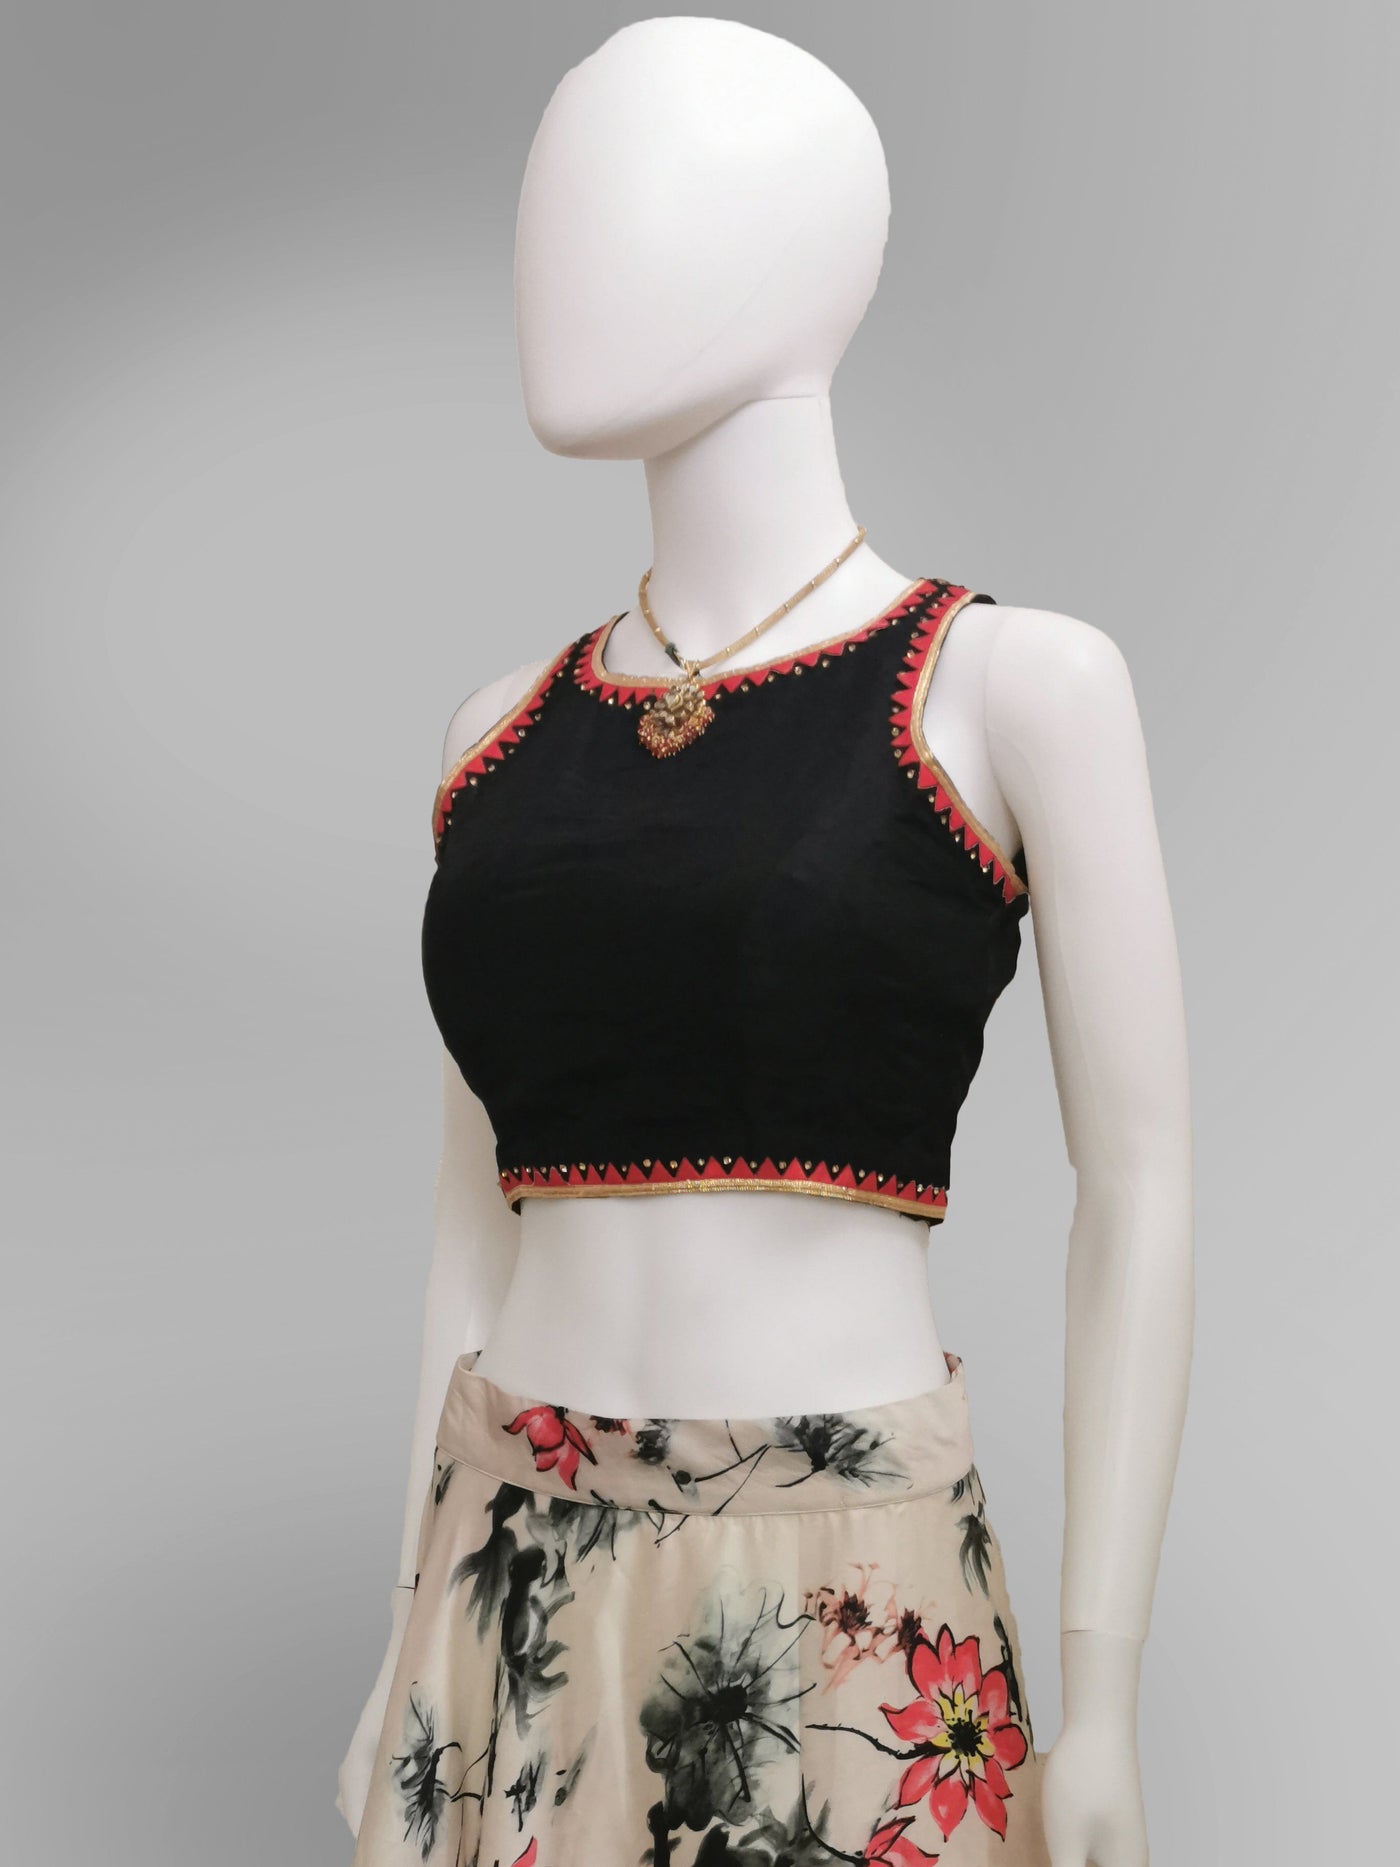 Oriental Floral Lehenga - Indian Clothing in Denver, CO, Aurora, CO, Boulder, CO, Fort Collins, CO, Colorado Springs, CO, Parker, CO, Highlands Ranch, CO, Cherry Creek, CO, Centennial, CO, and Longmont, CO. Nationwide shipping USA - India Fashion X